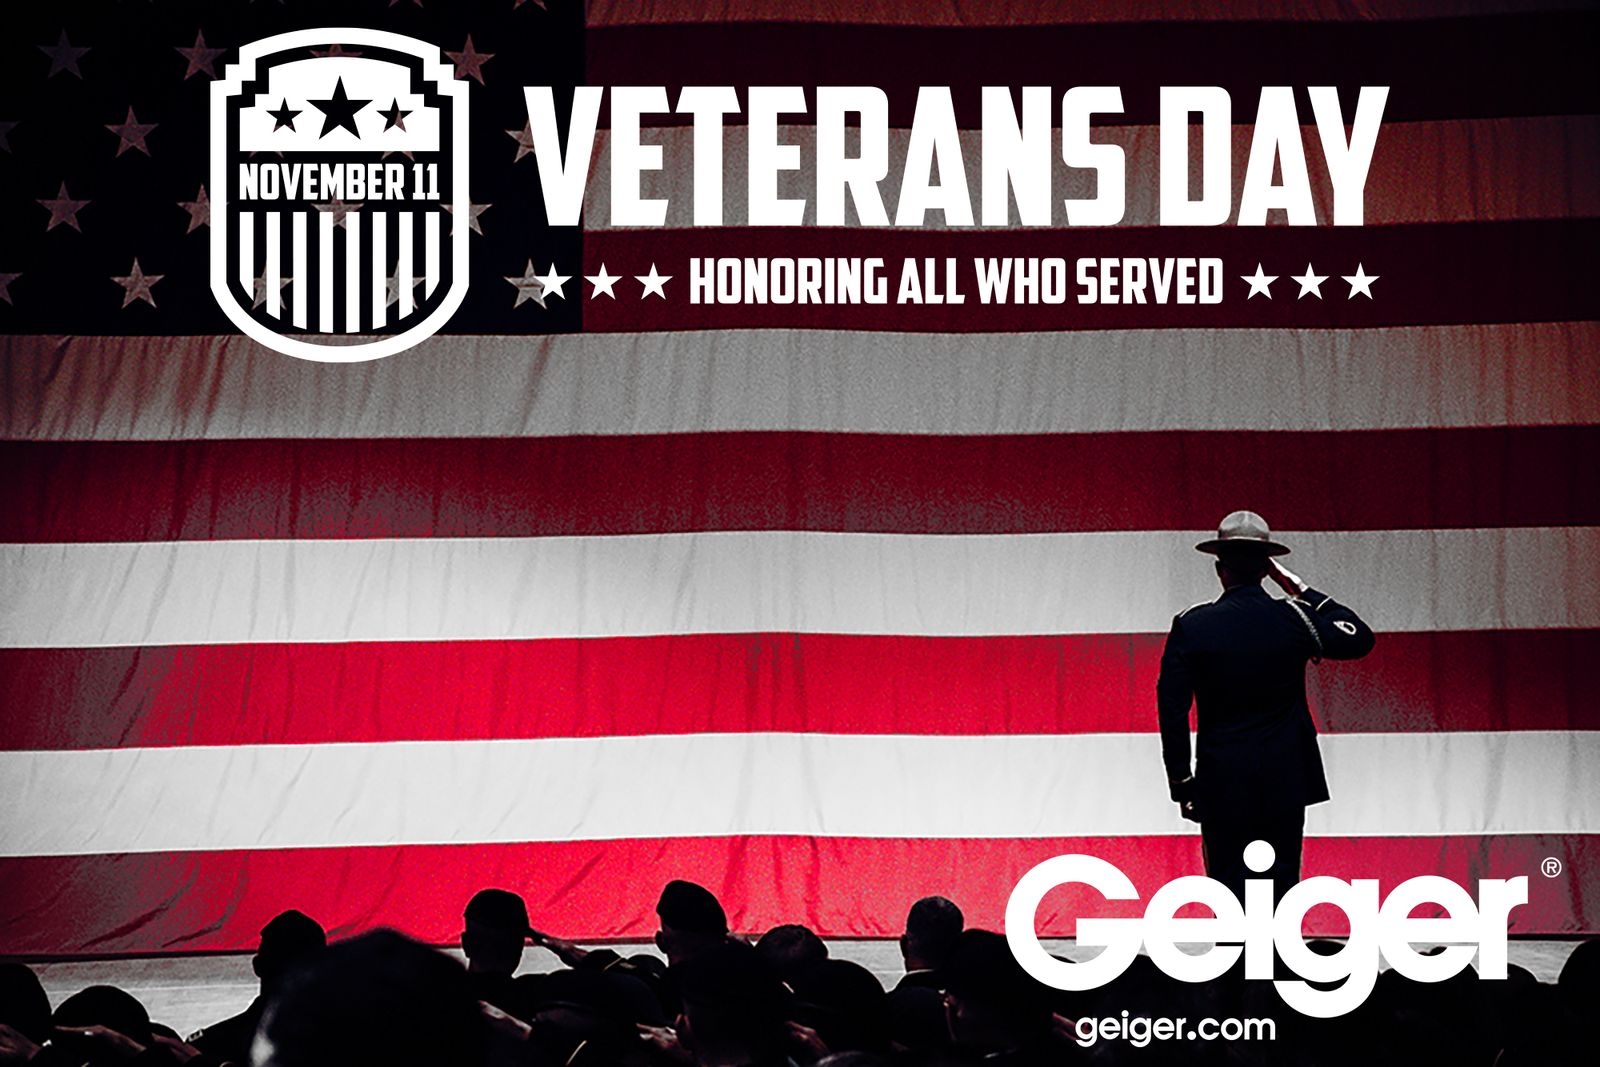 Veterans Day - Honoring all who have served